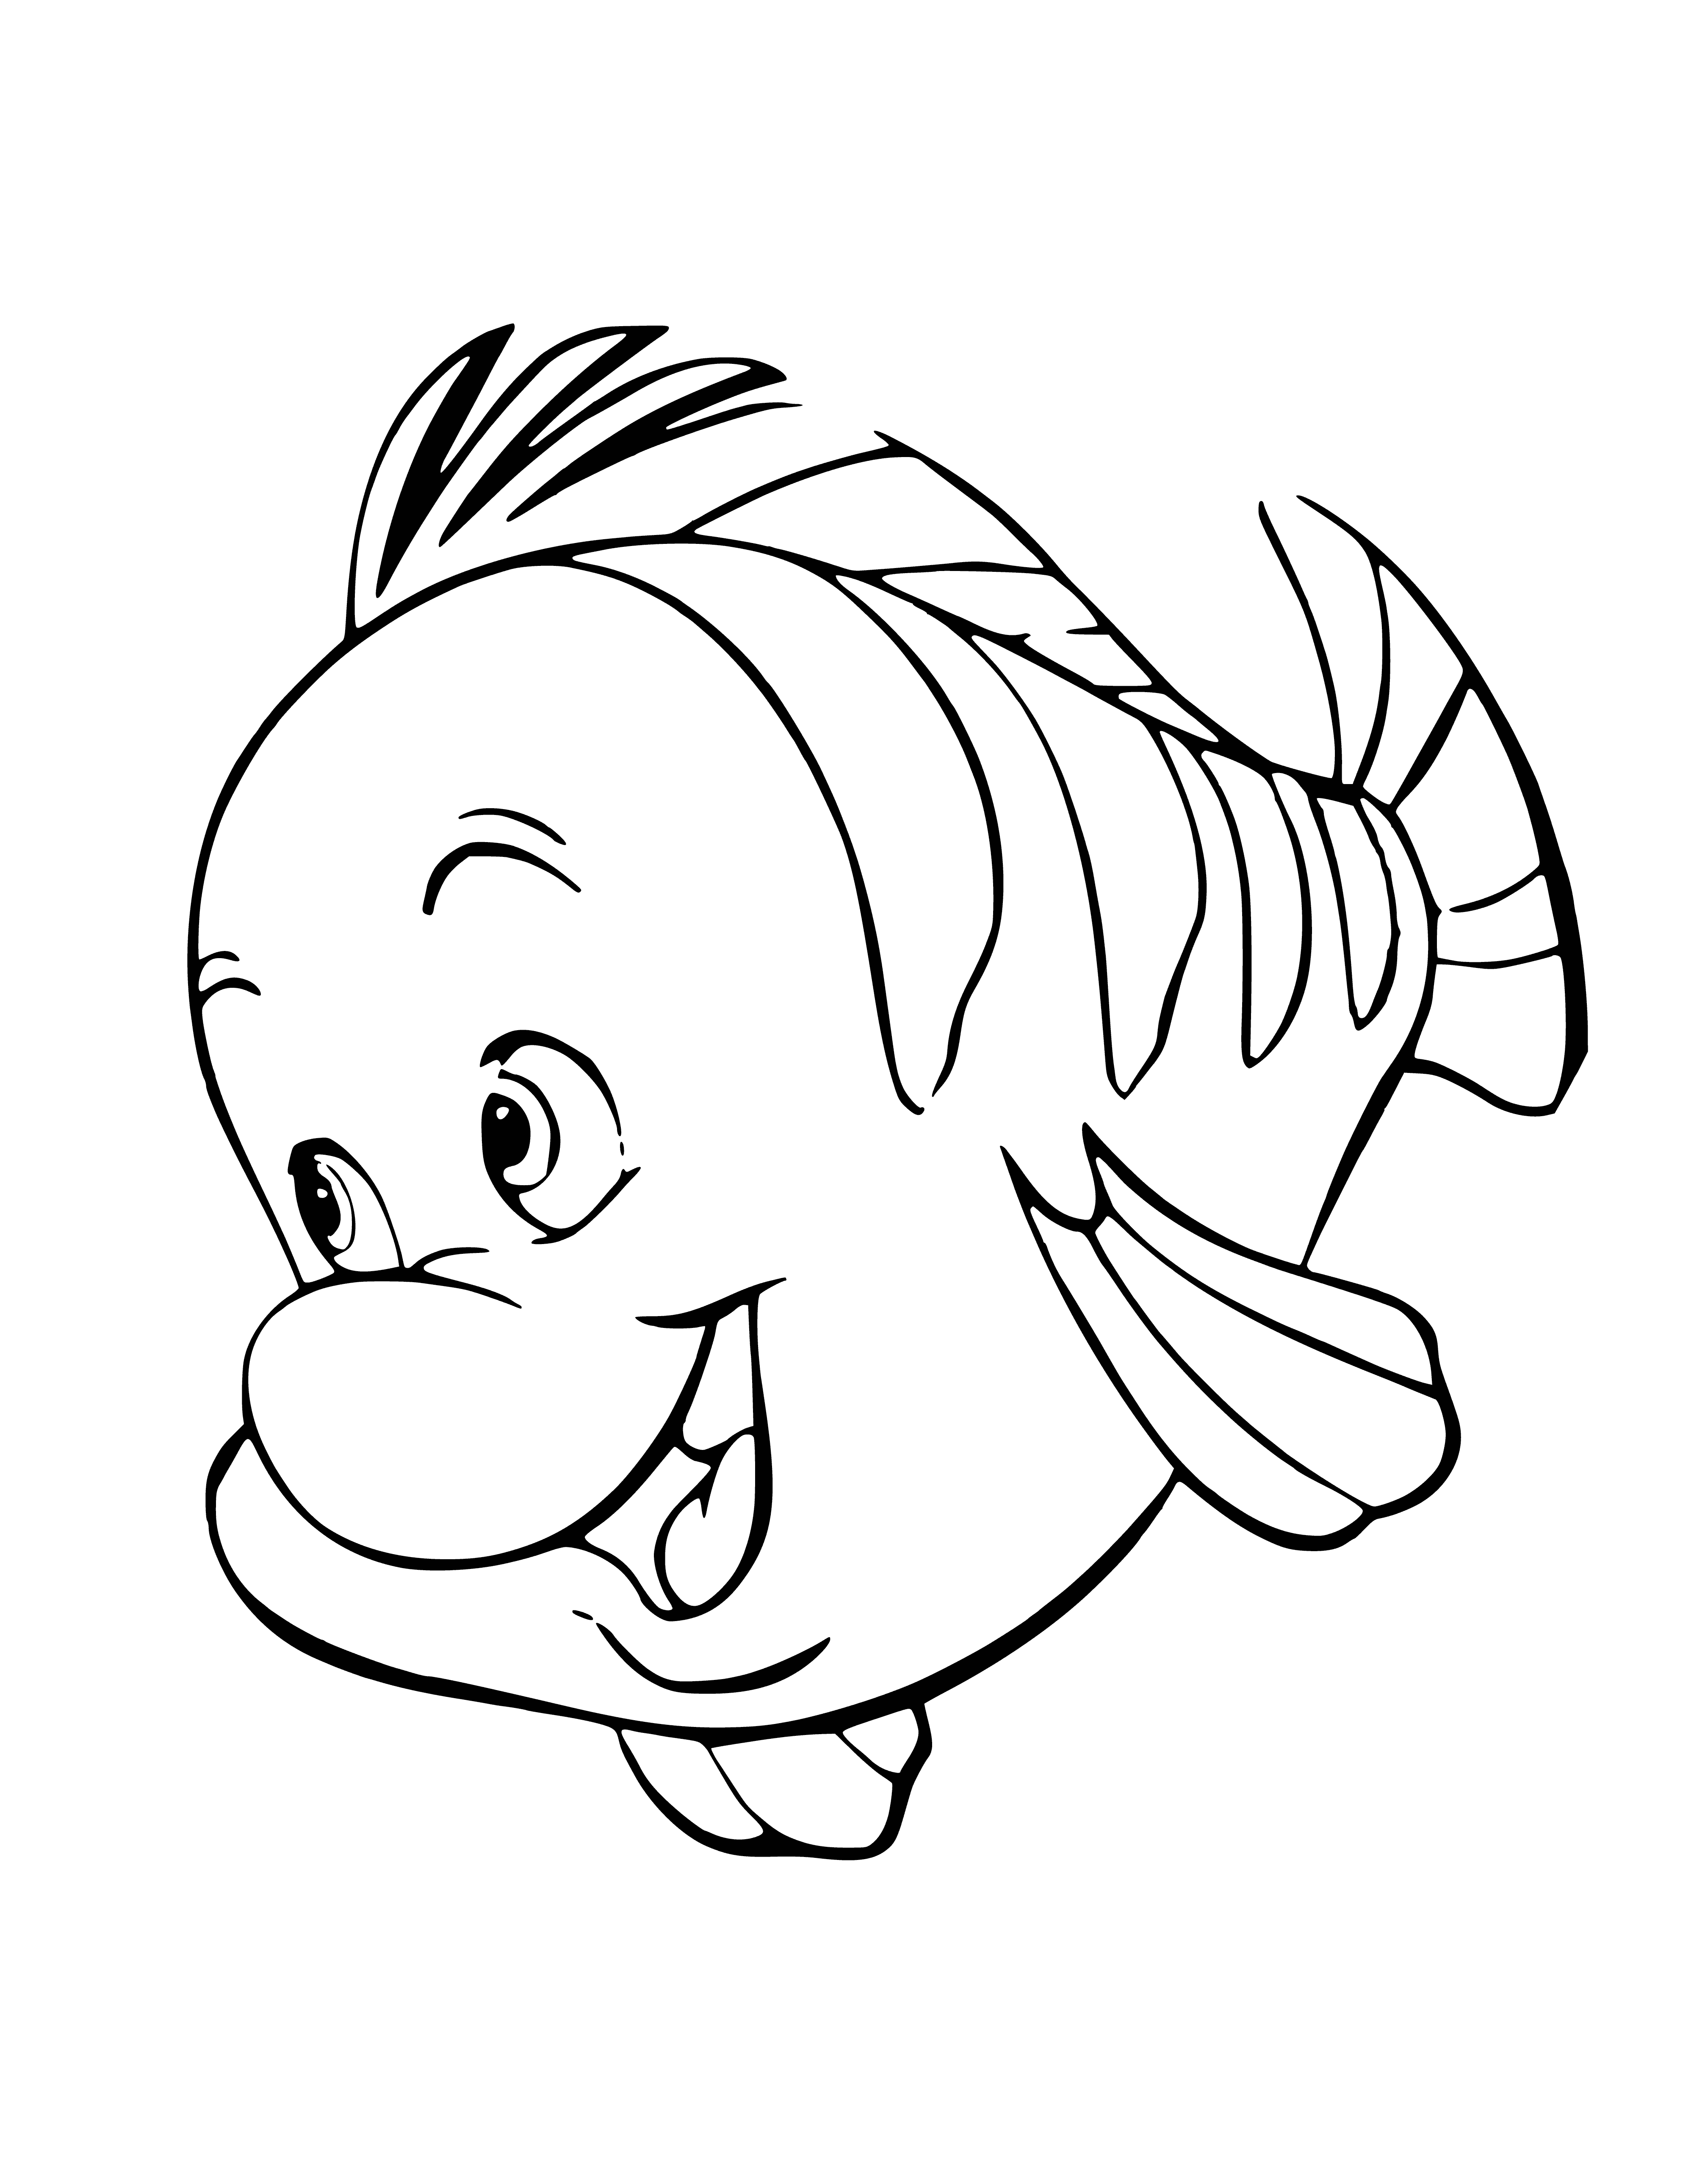 coloring page: Small fish with brown body, light brown spots, large mouth, thin lips, small fins, and long tail.